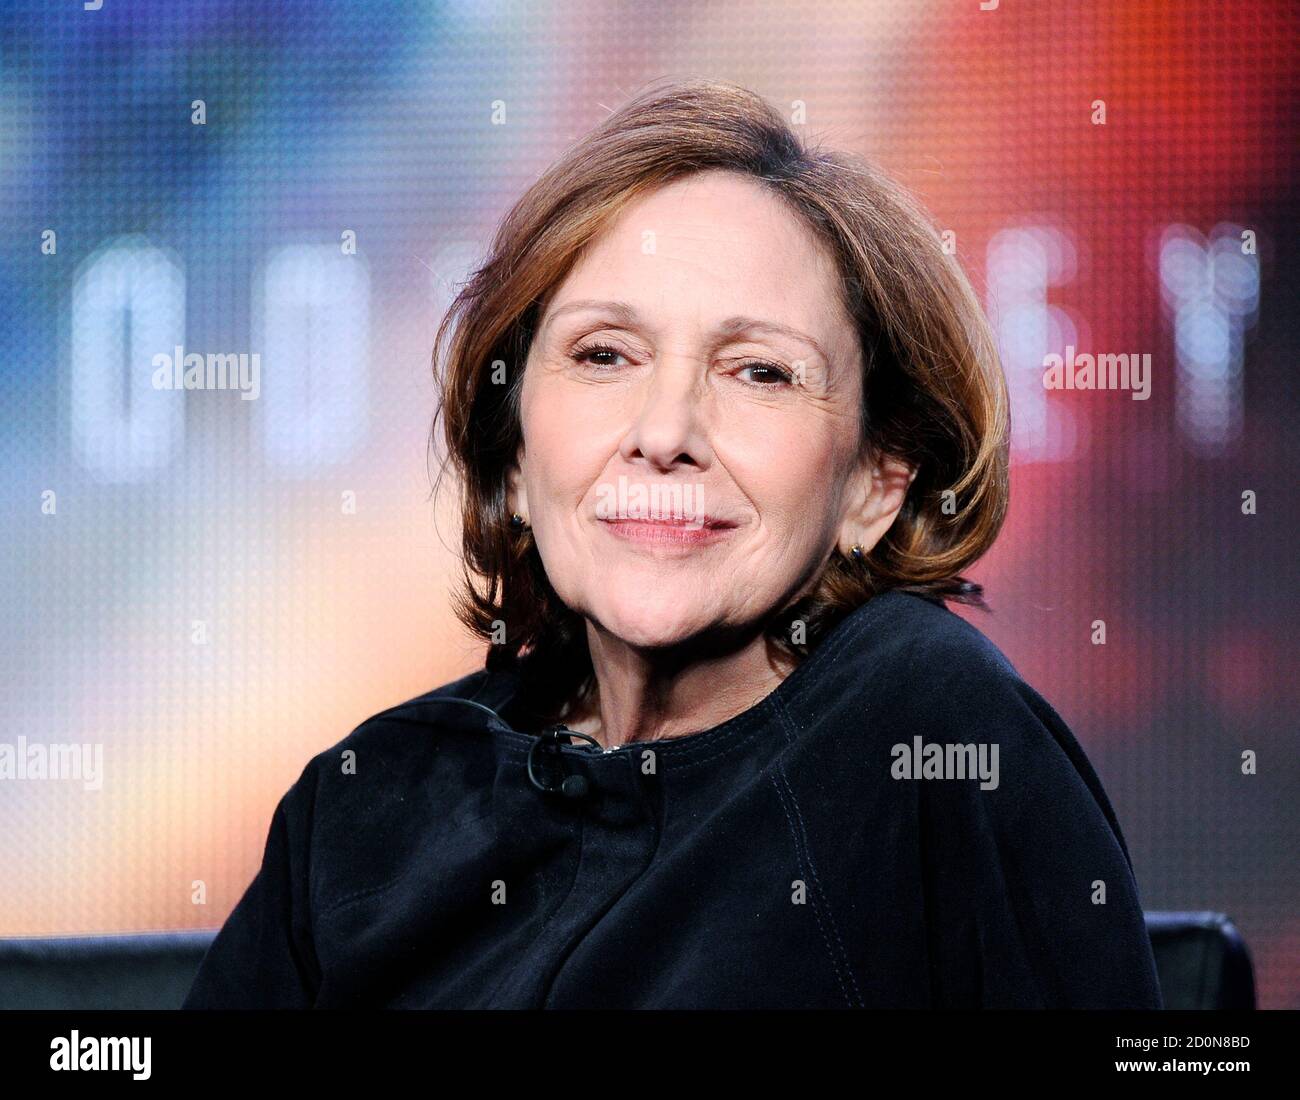 Ann Druyan, executive producer/writer of 'Cosmos', participates in Fox Broadcasting Company's part of the Television Critics Association (TCA) Winter 2014 presentations in Pasadena, California, January 13 , 2014. REUTERS/Kevork Djansezian  (UNITED STATES - Tags: ENTERTAINMENT) Stock Photo